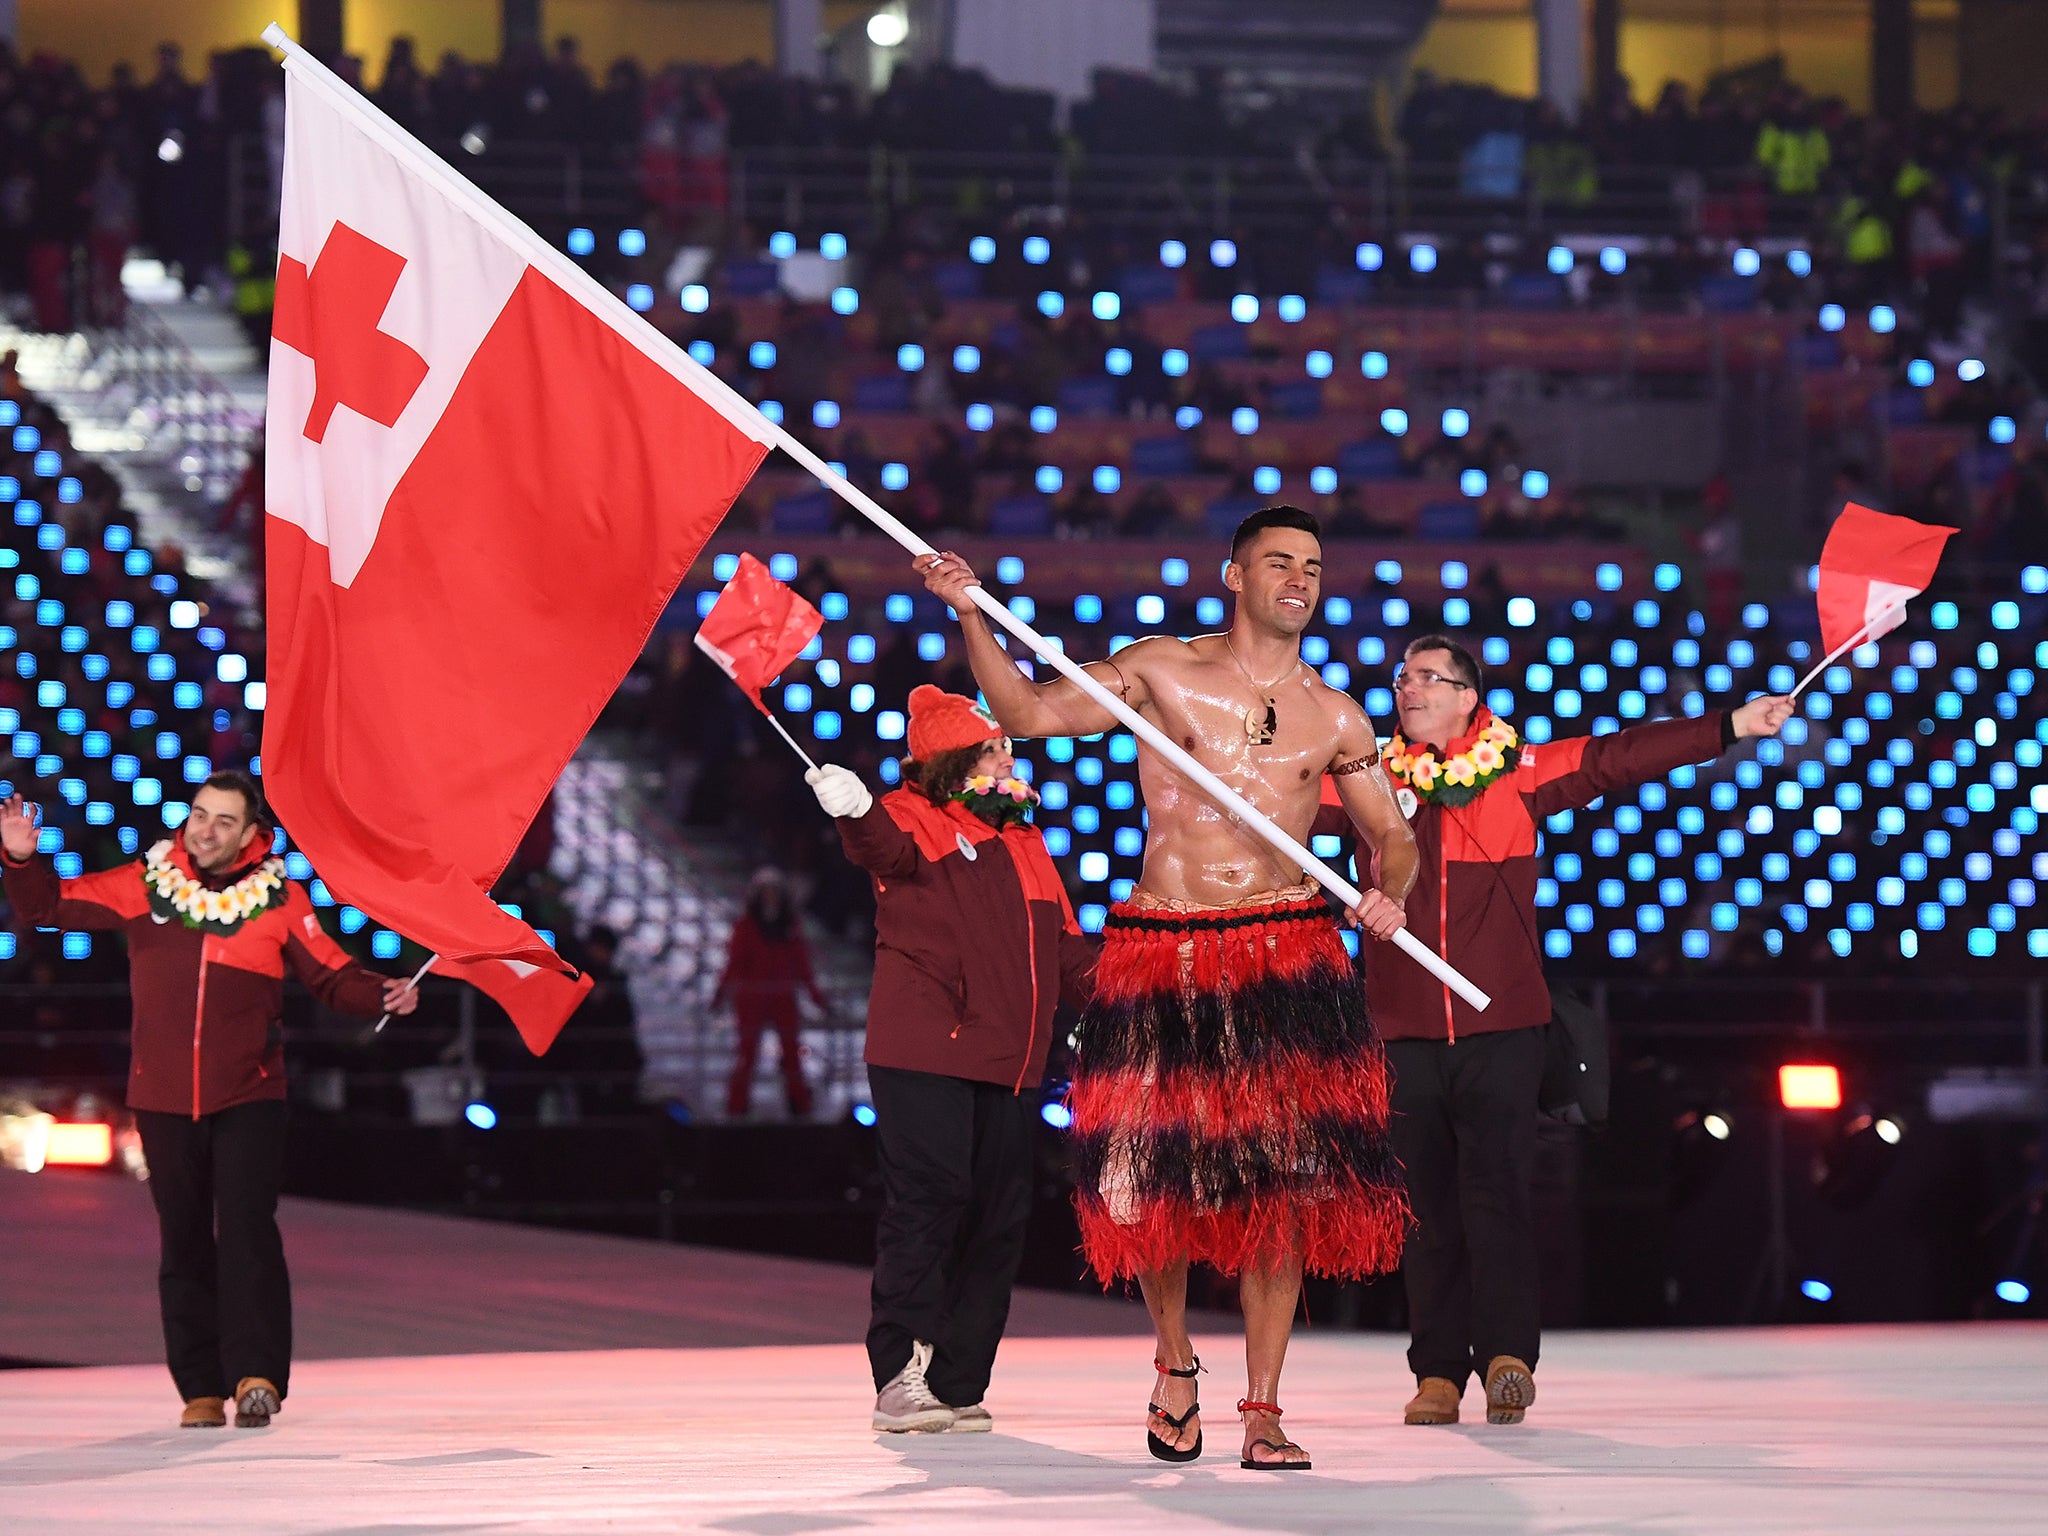 Pita Taufatofua walks out at the Winter Olympics opening ceremony topless despite temperatures dipping to -1 Celsius